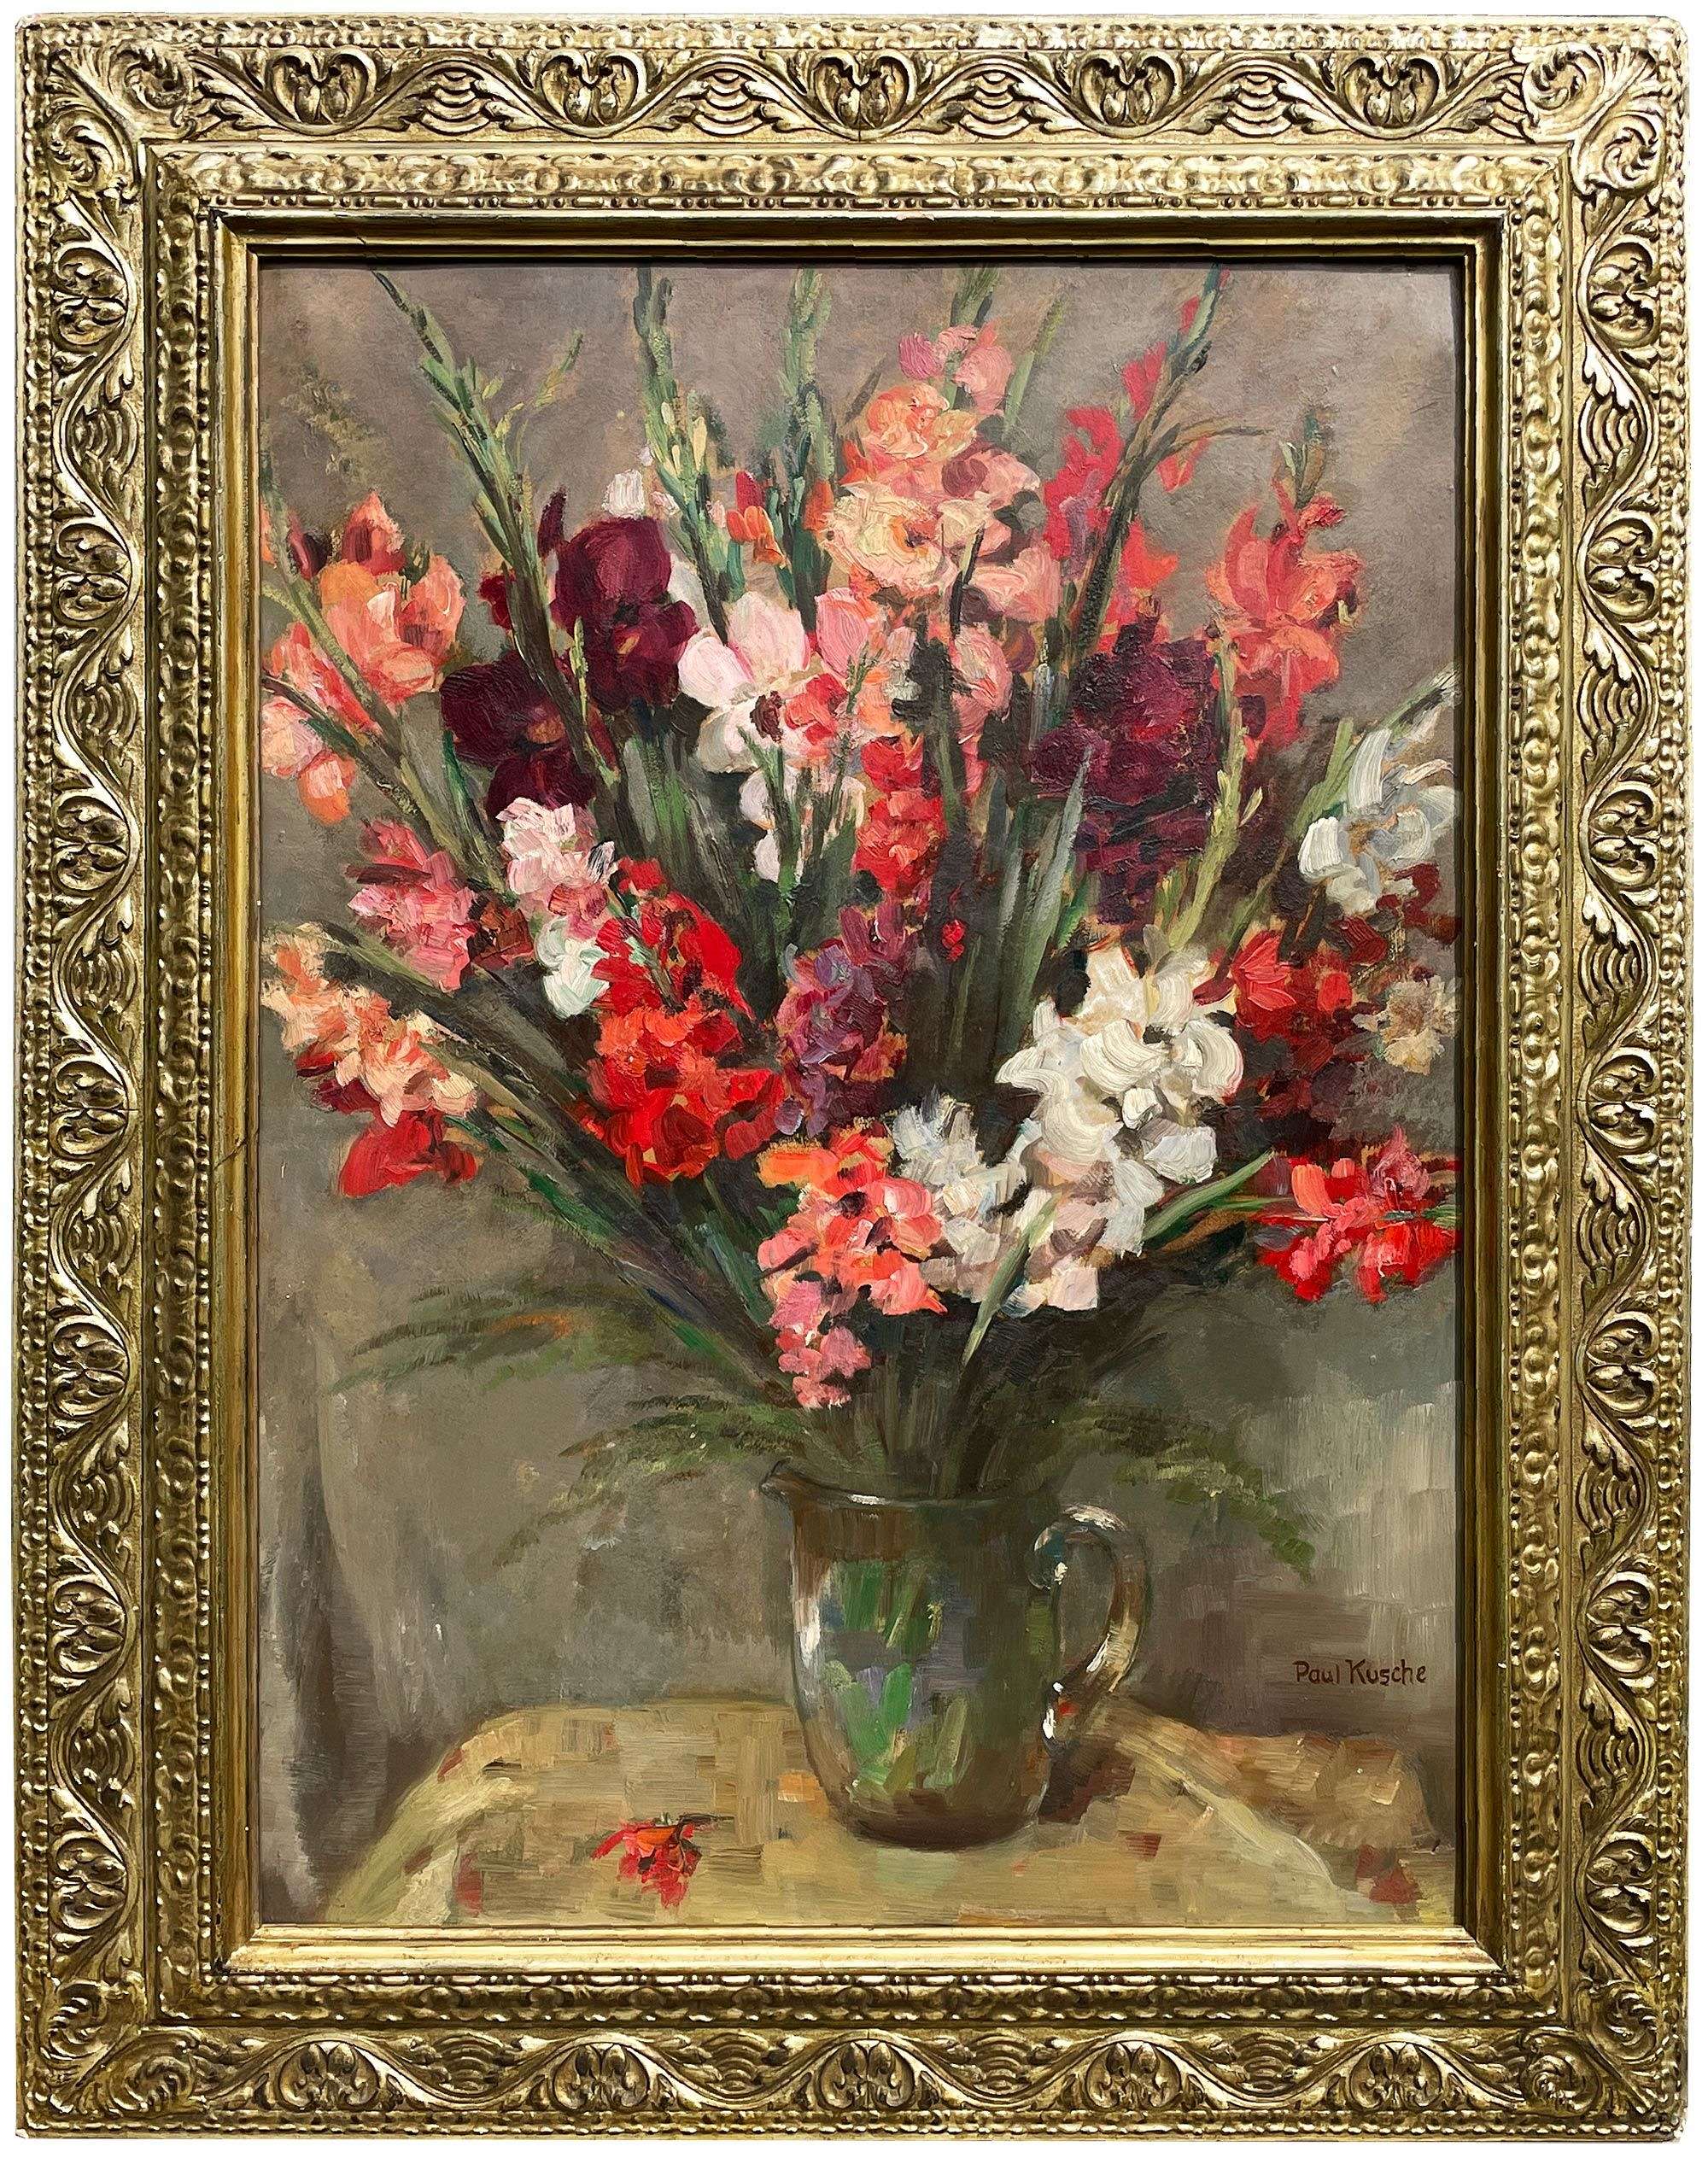 Still Life Oil Painting, Gladiolus By Paul Kusche, 1920